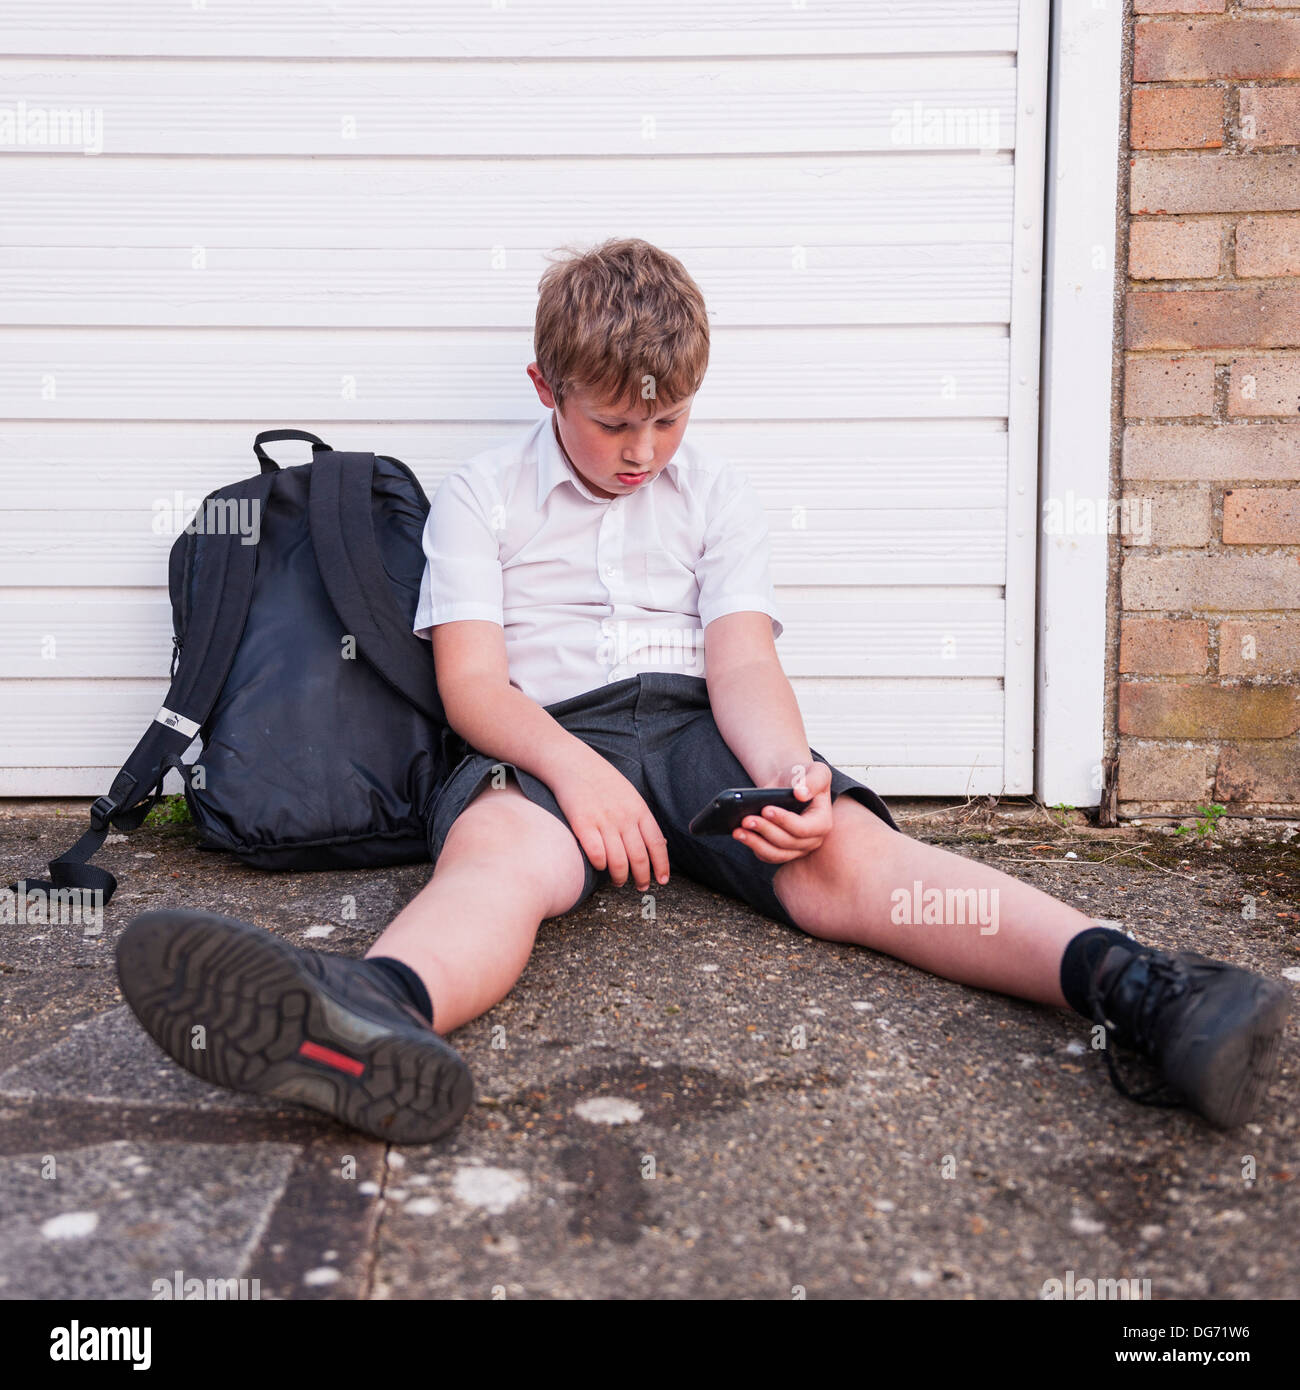 A boy of 10 looking sad as he looks at his mobile phone showing the effects of bullying by text or social networking in the Uk Stock Photo